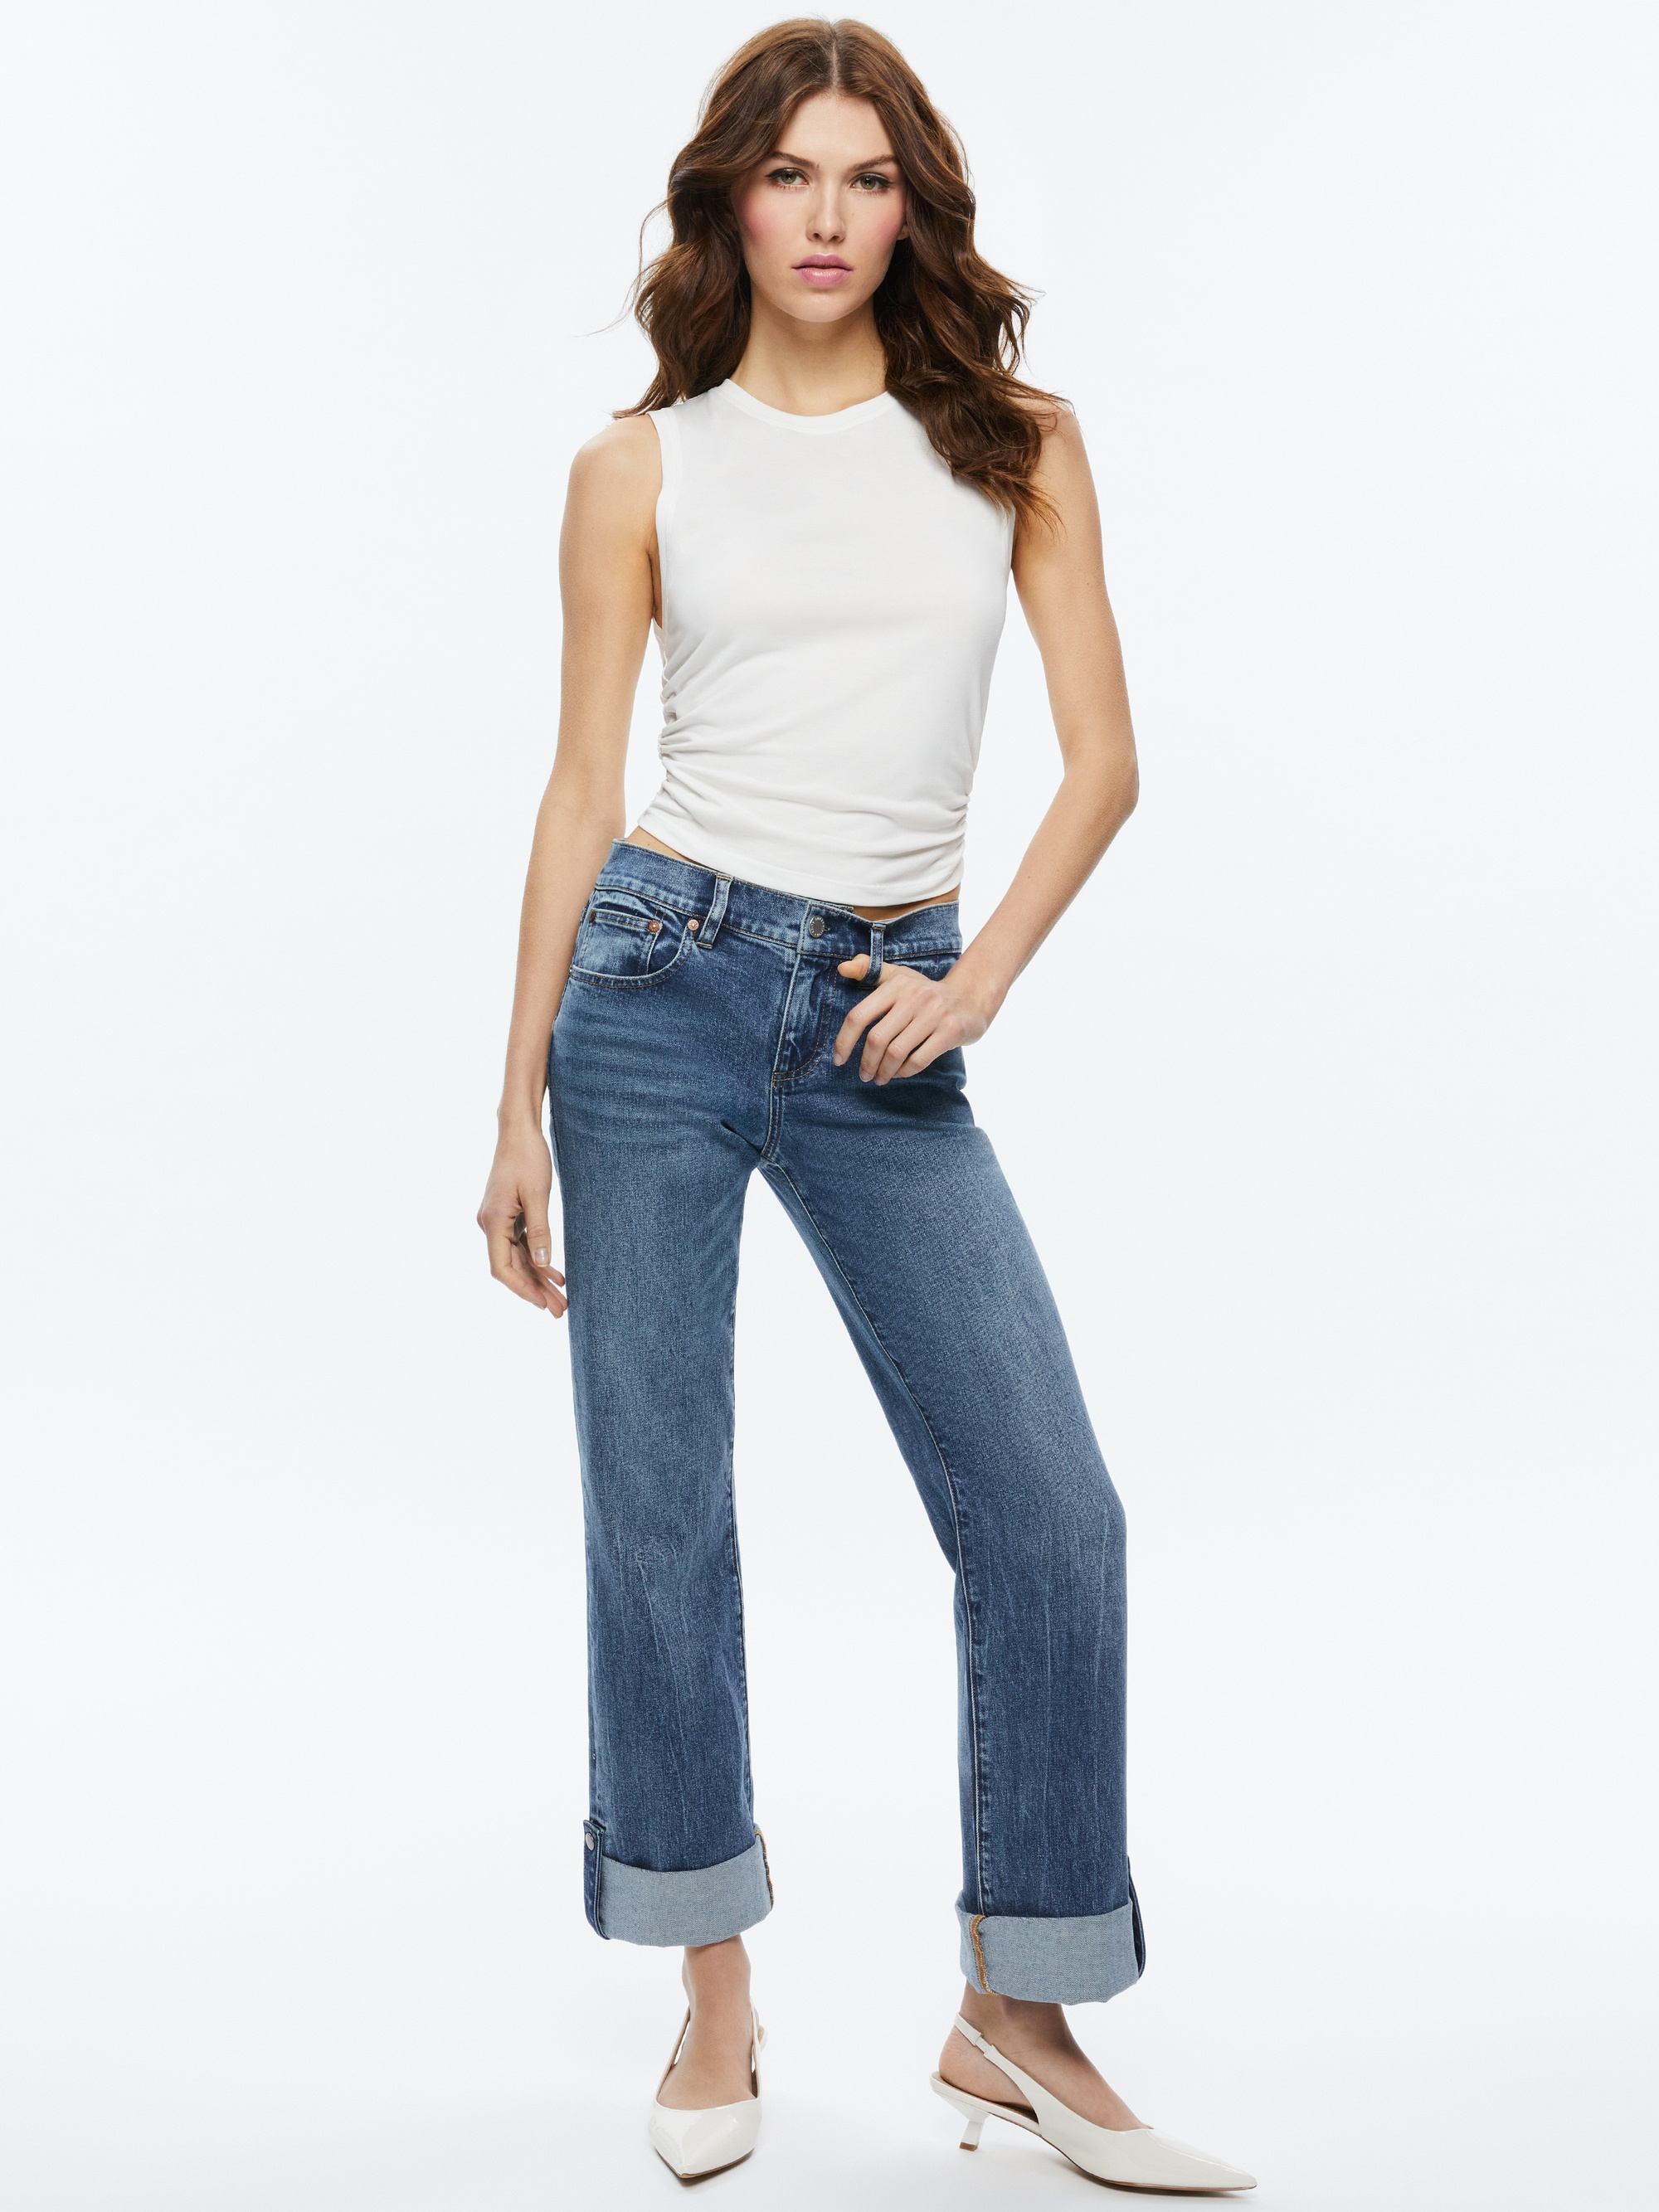 ABILENE LOW RISE CUFFED JEAN WITH SNAPS - 6